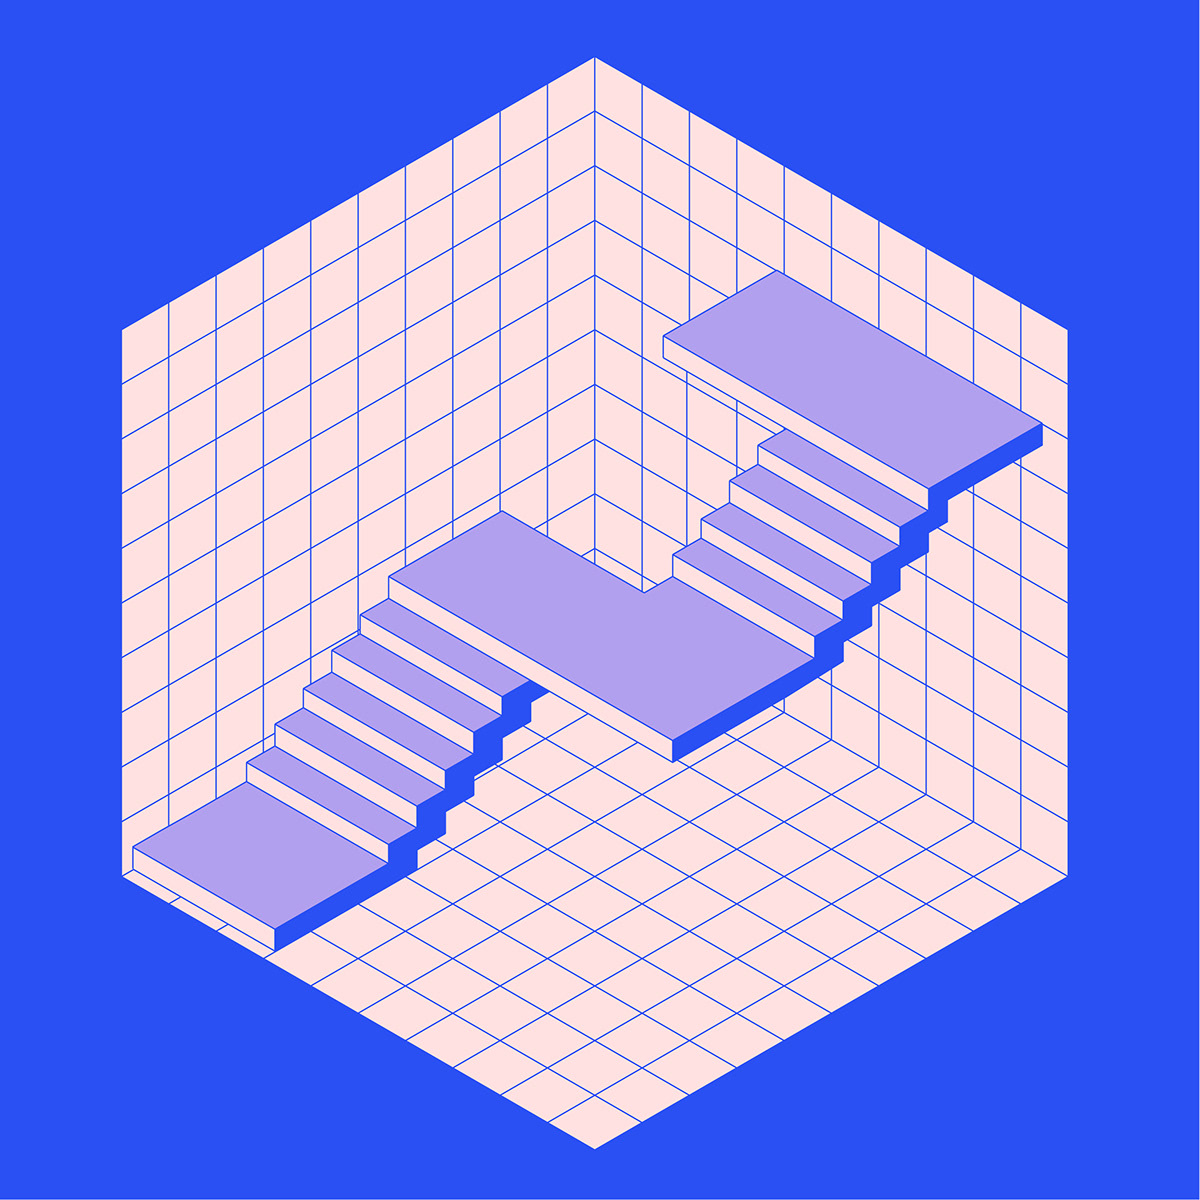 stair color blue pink grid architecure typology Circulation funky groovy